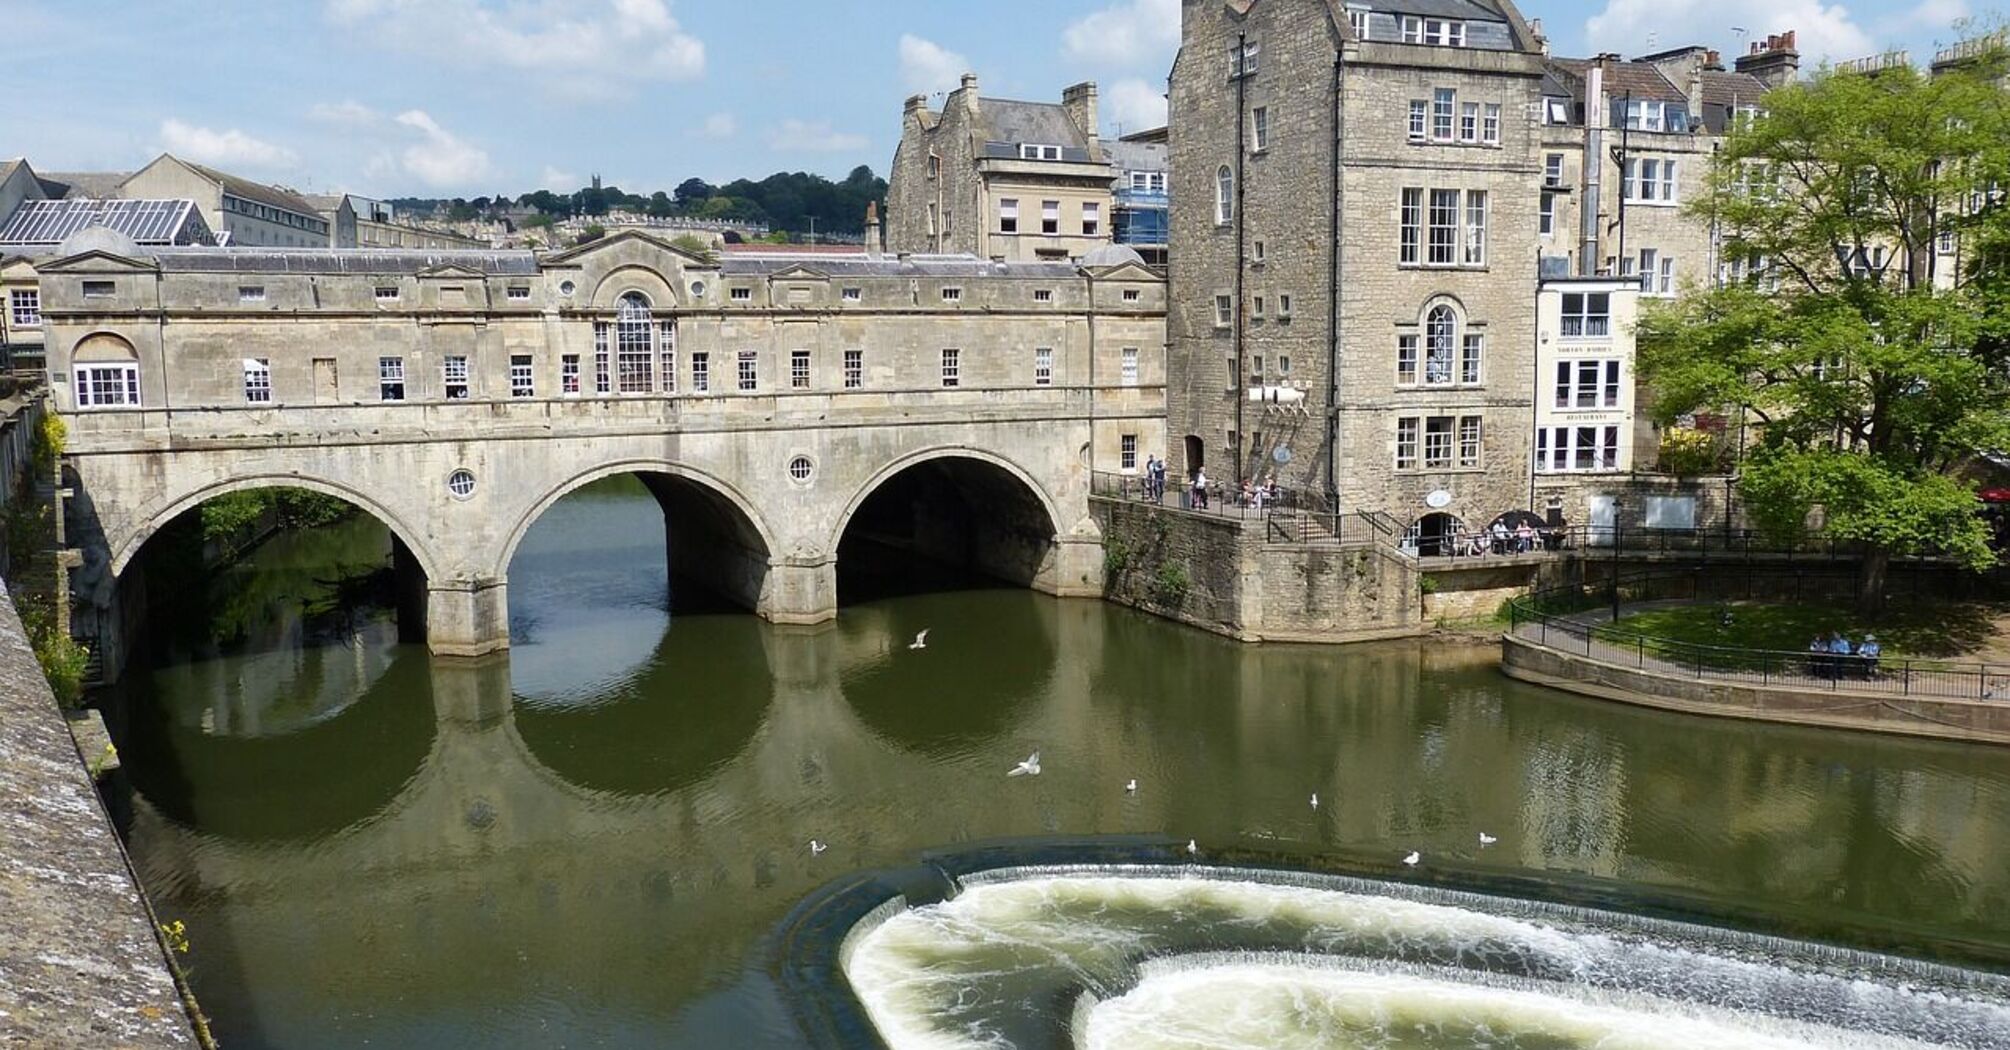 TOP 11 hotels in Bath: luxury vacation in the UK